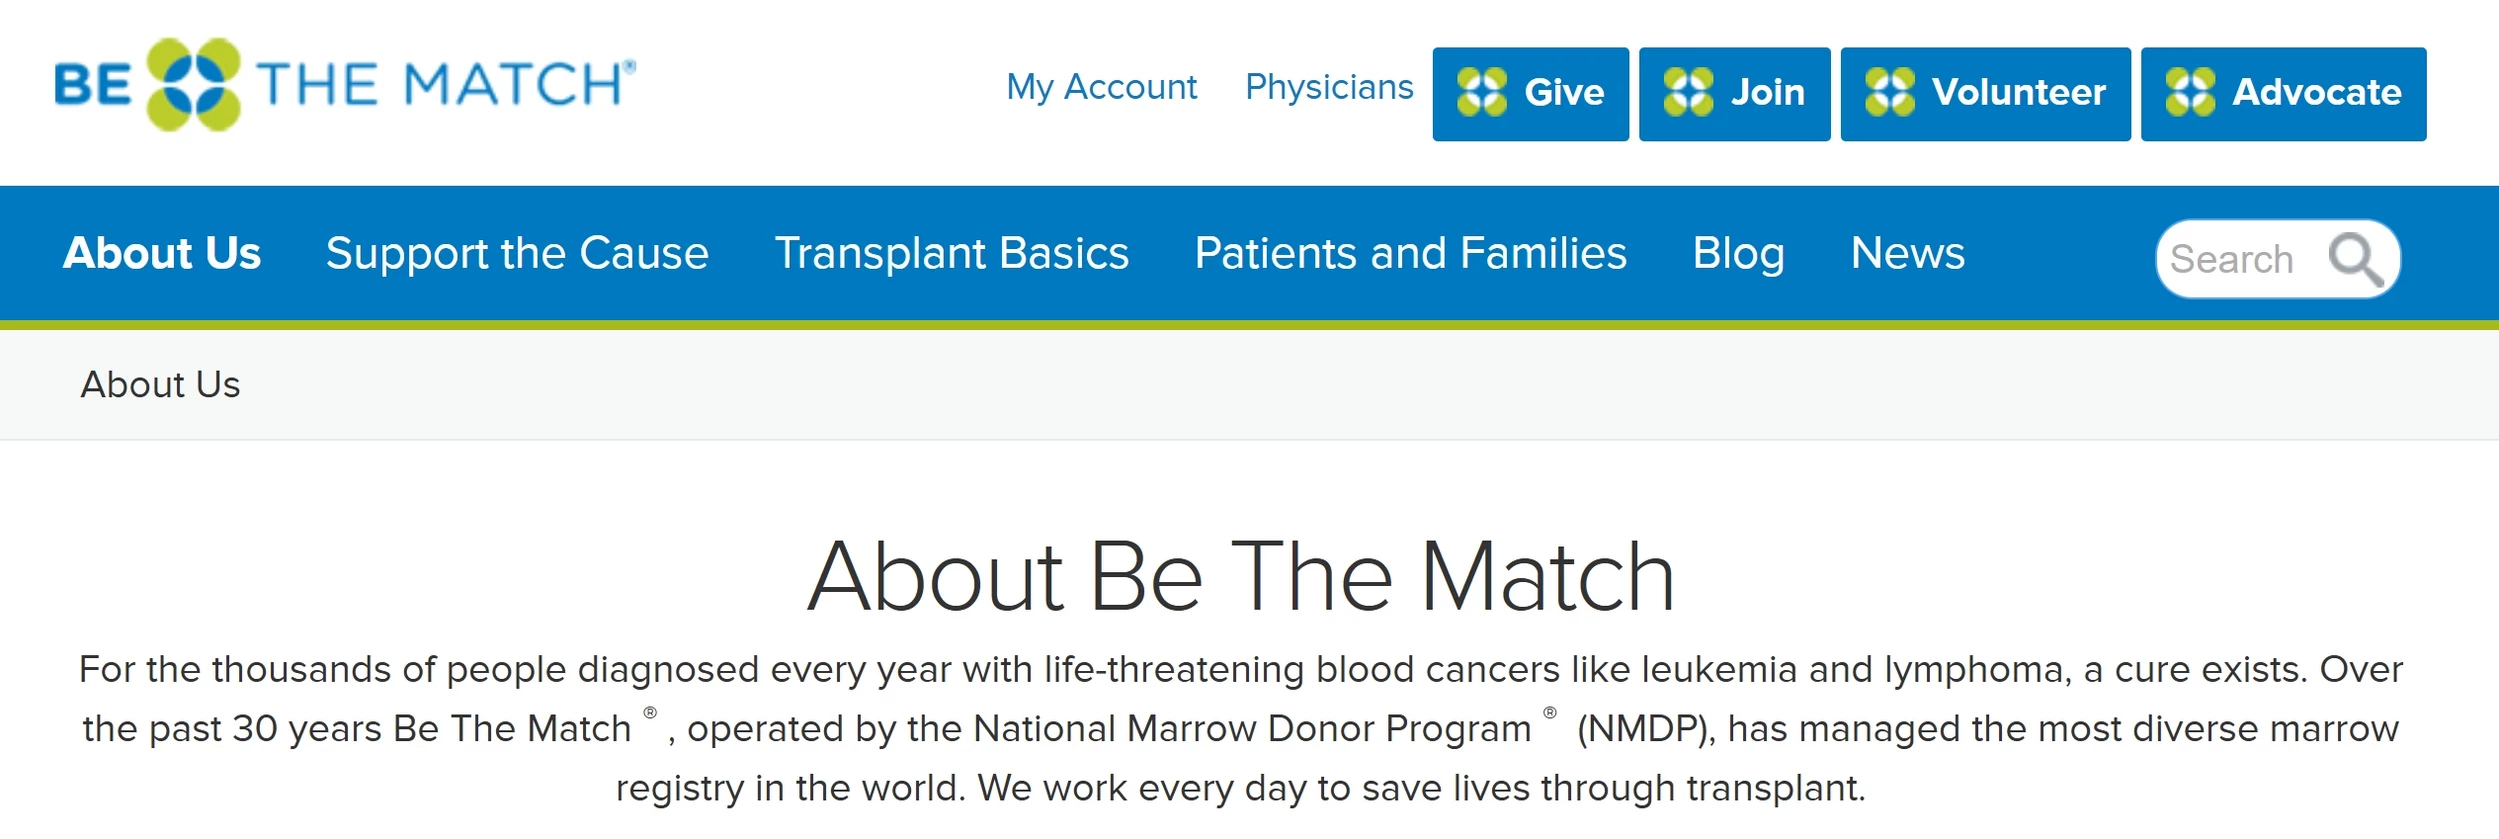 https://bethematch.org/about-us/